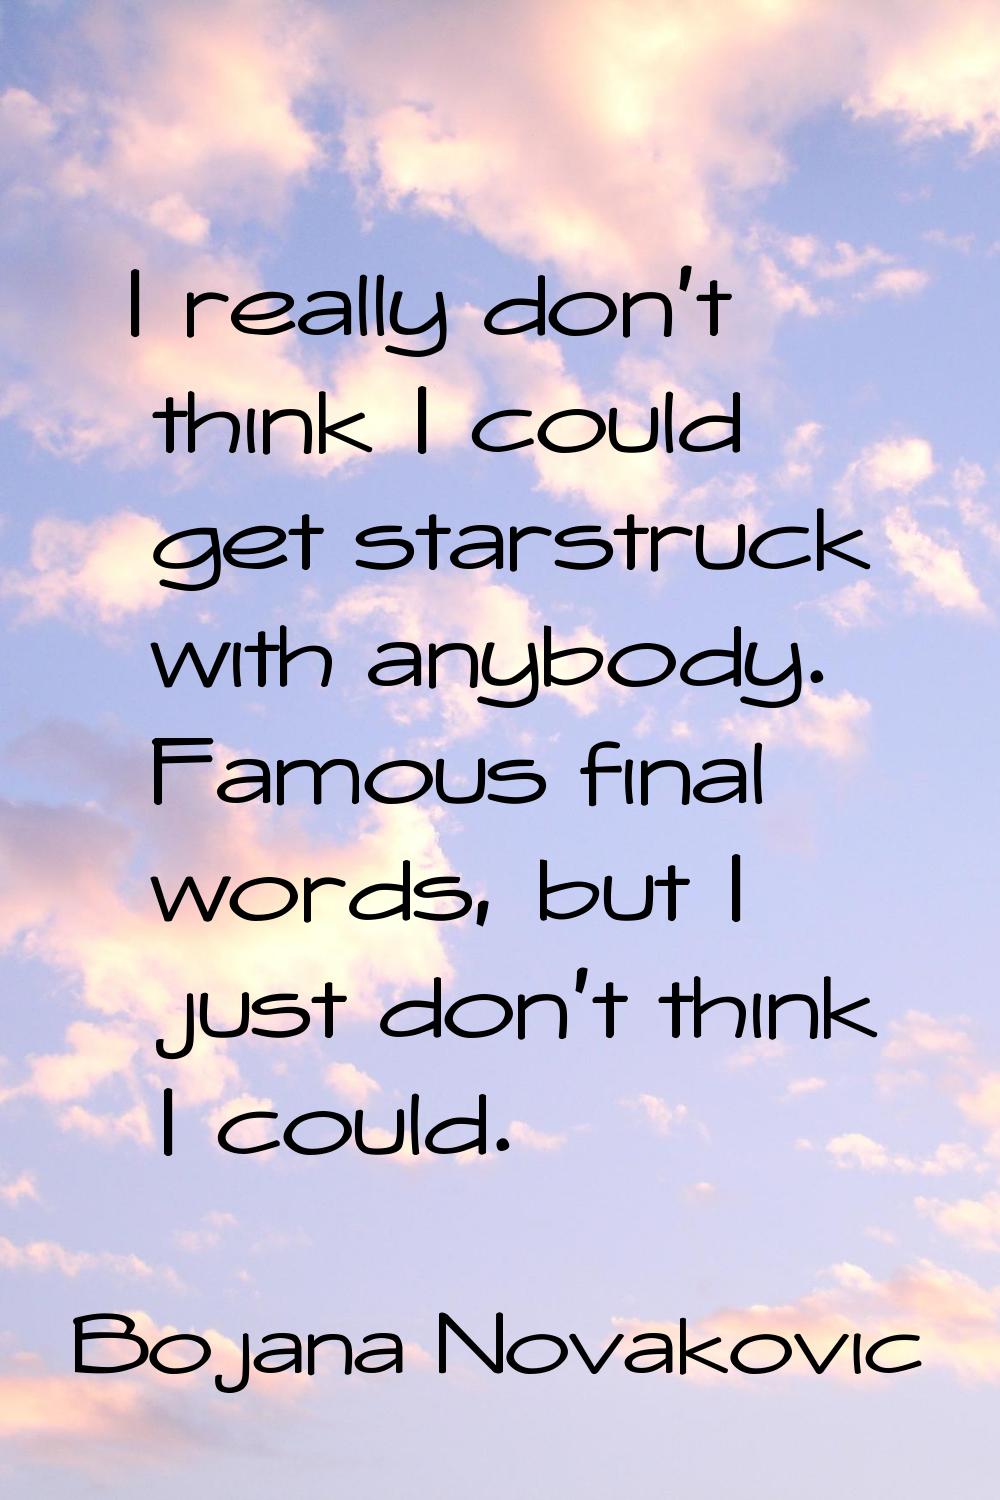 I really don't think I could get starstruck with anybody. Famous final words, but I just don't thin